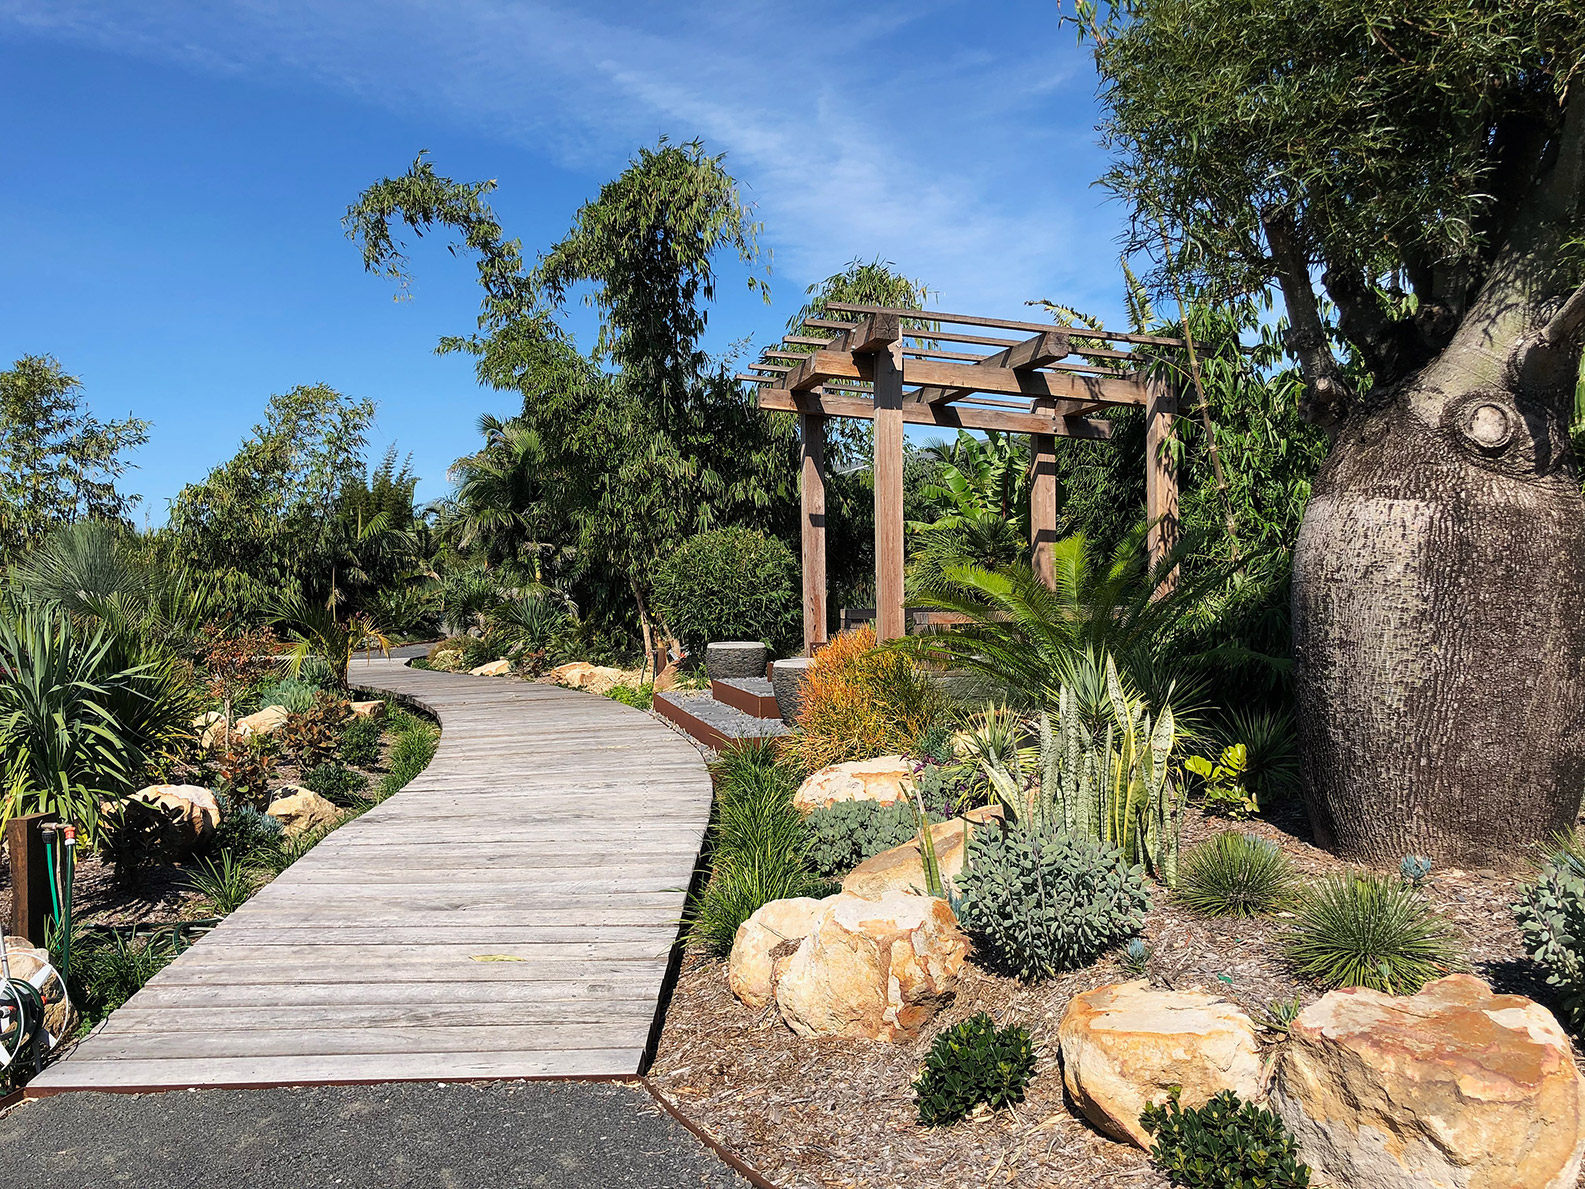 Landscape Design and Construction Berry by Bamboo South Coast